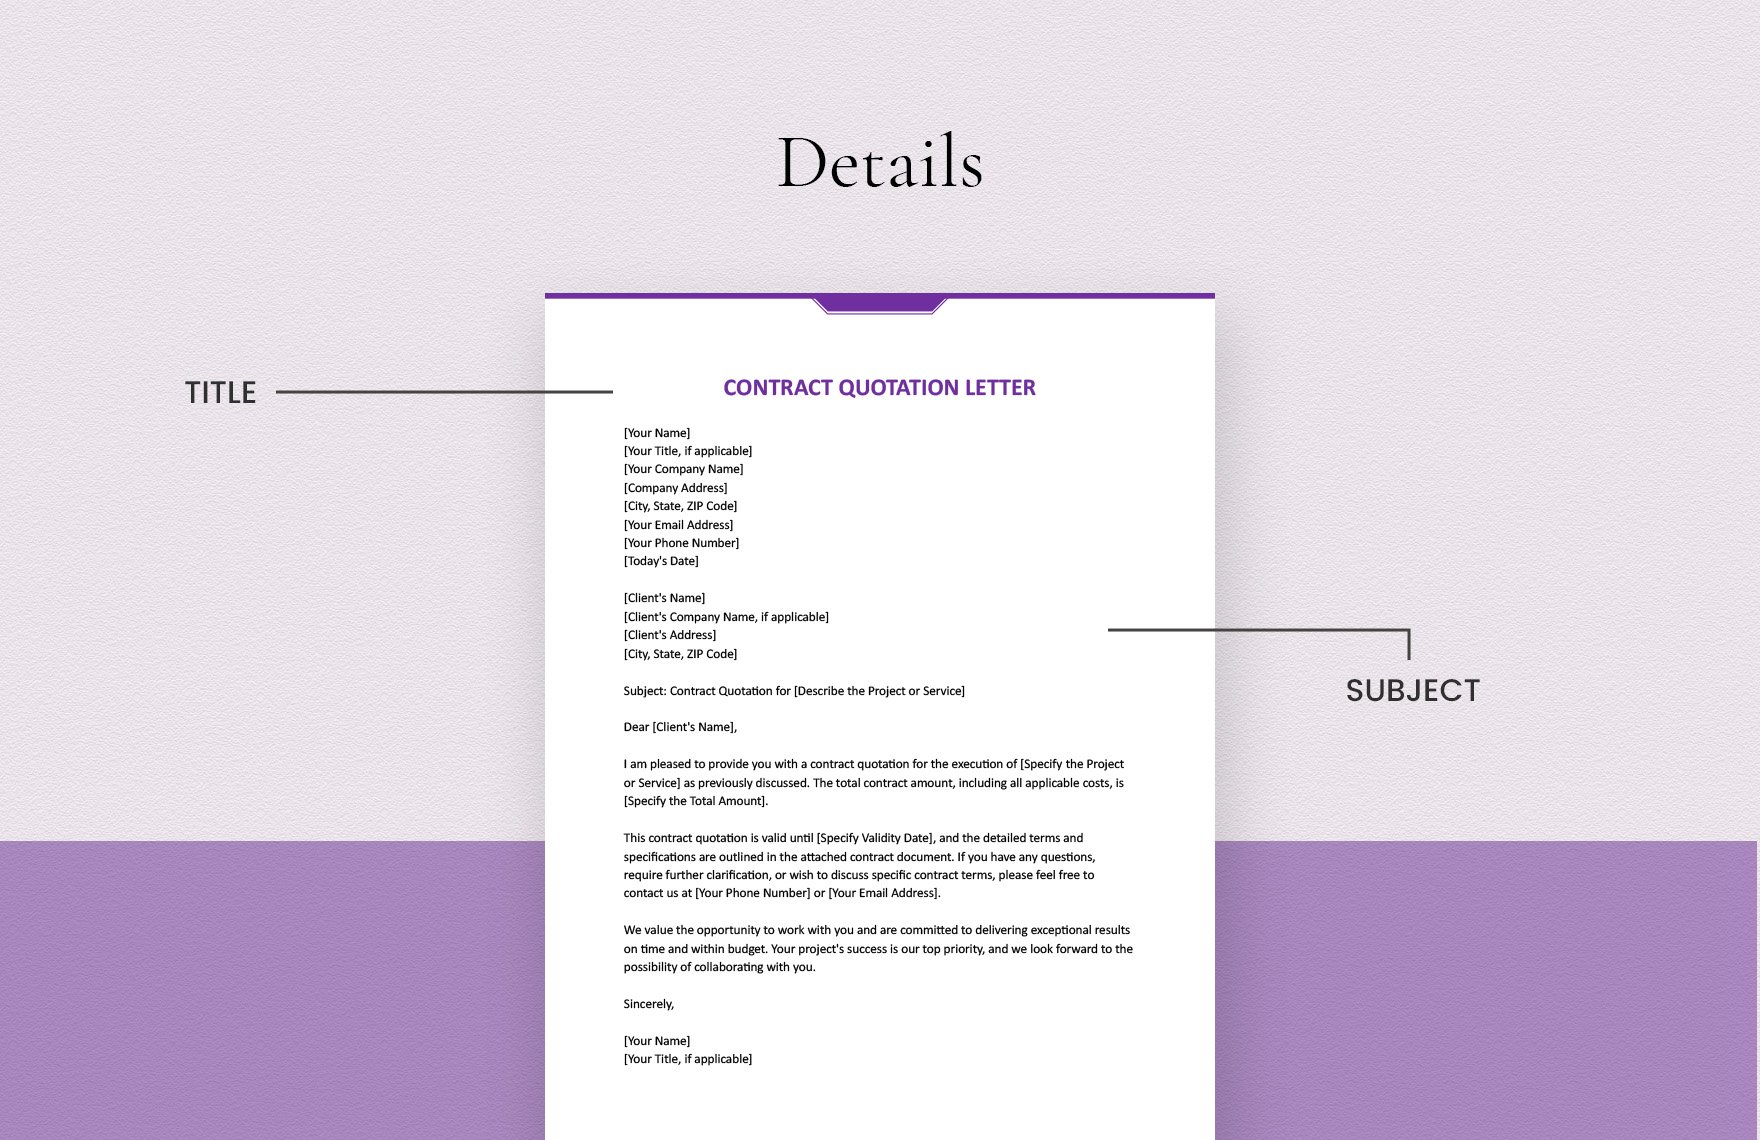 Contract Quotation Letter